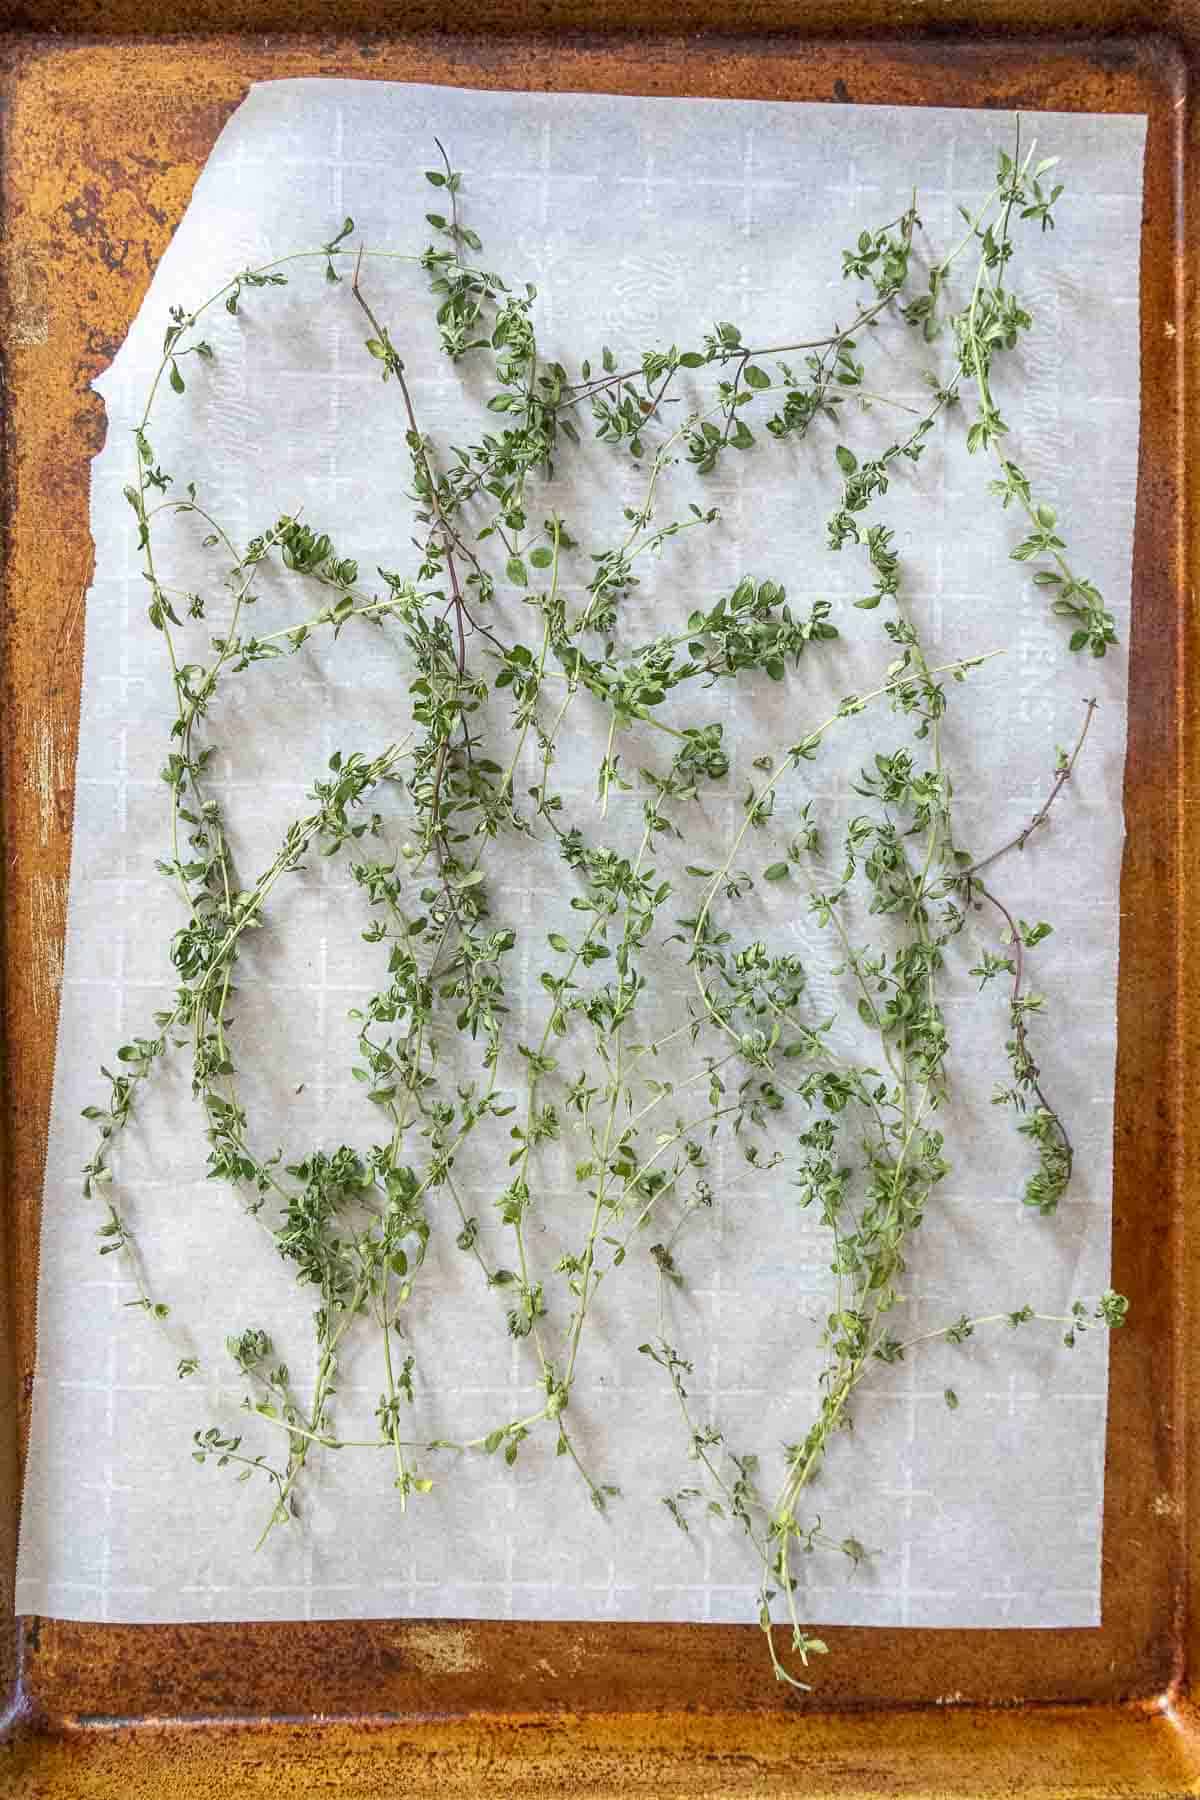 Thyme on a baking sheet for drying.